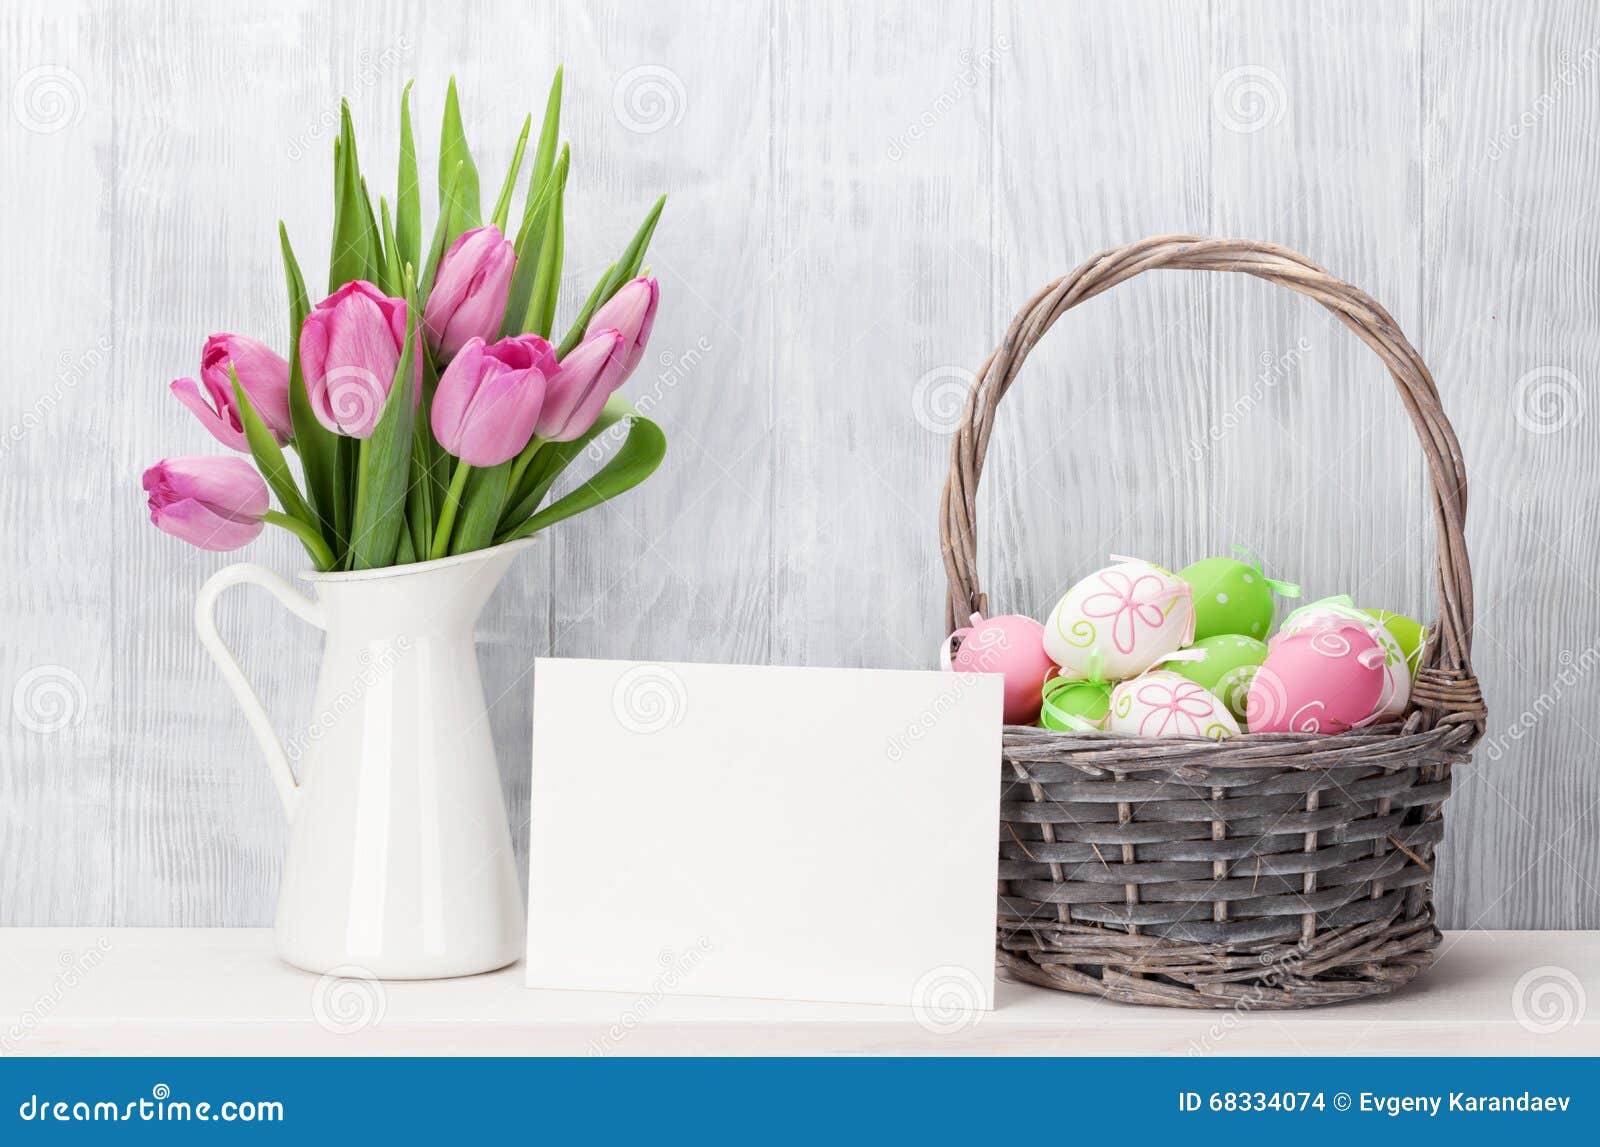 Easter Eggs, Greeting Card and Pink Tulips Stock Photo - Image of happy ...